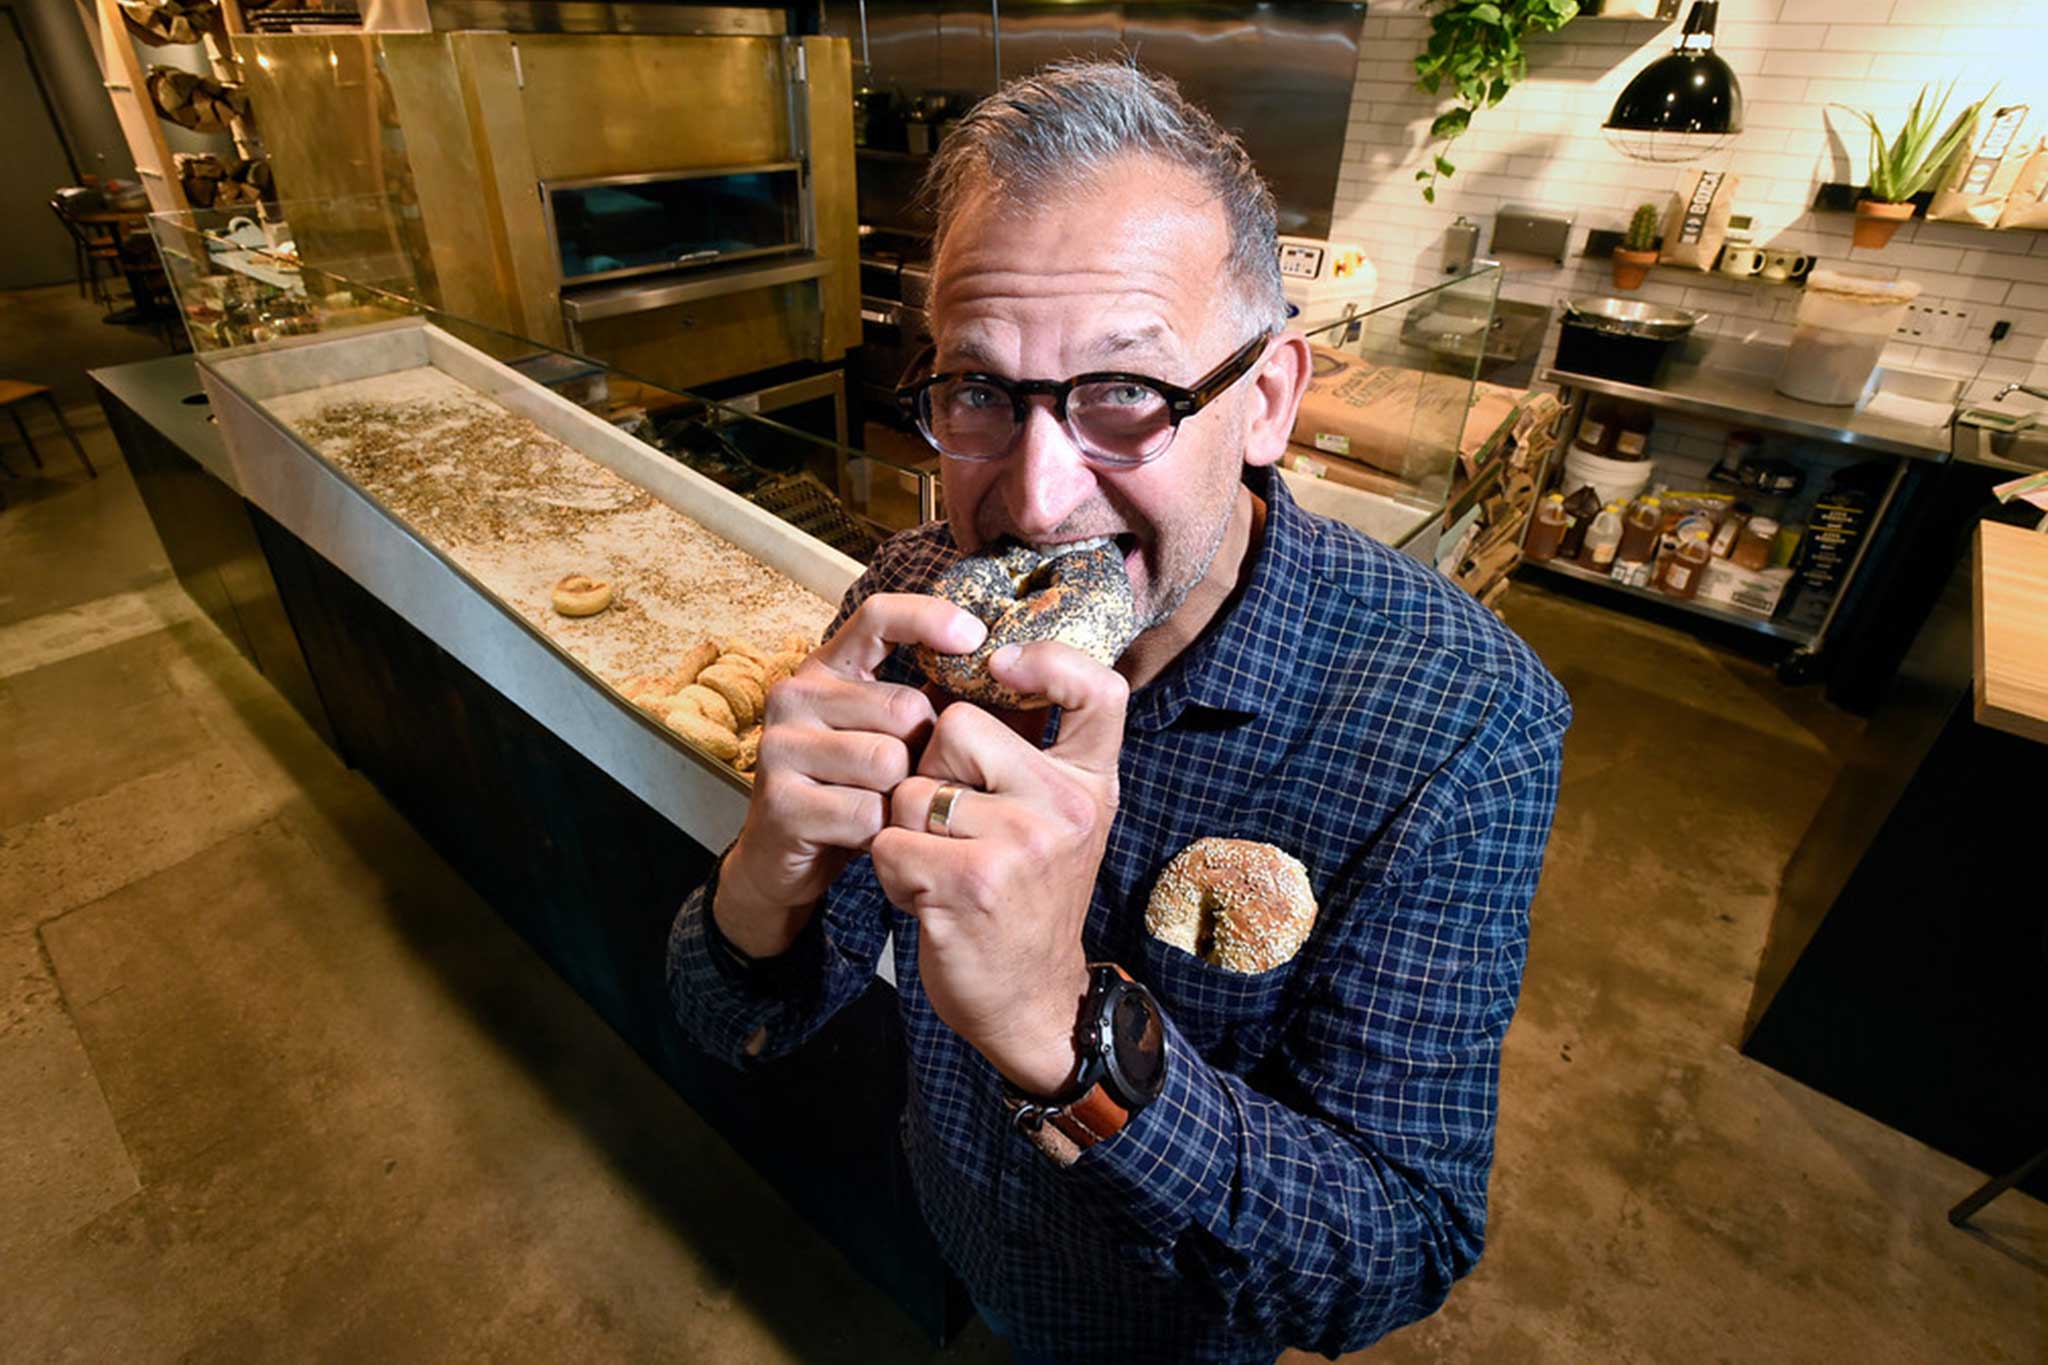 Woodgrain Bagels owner taking a bite into a bagel